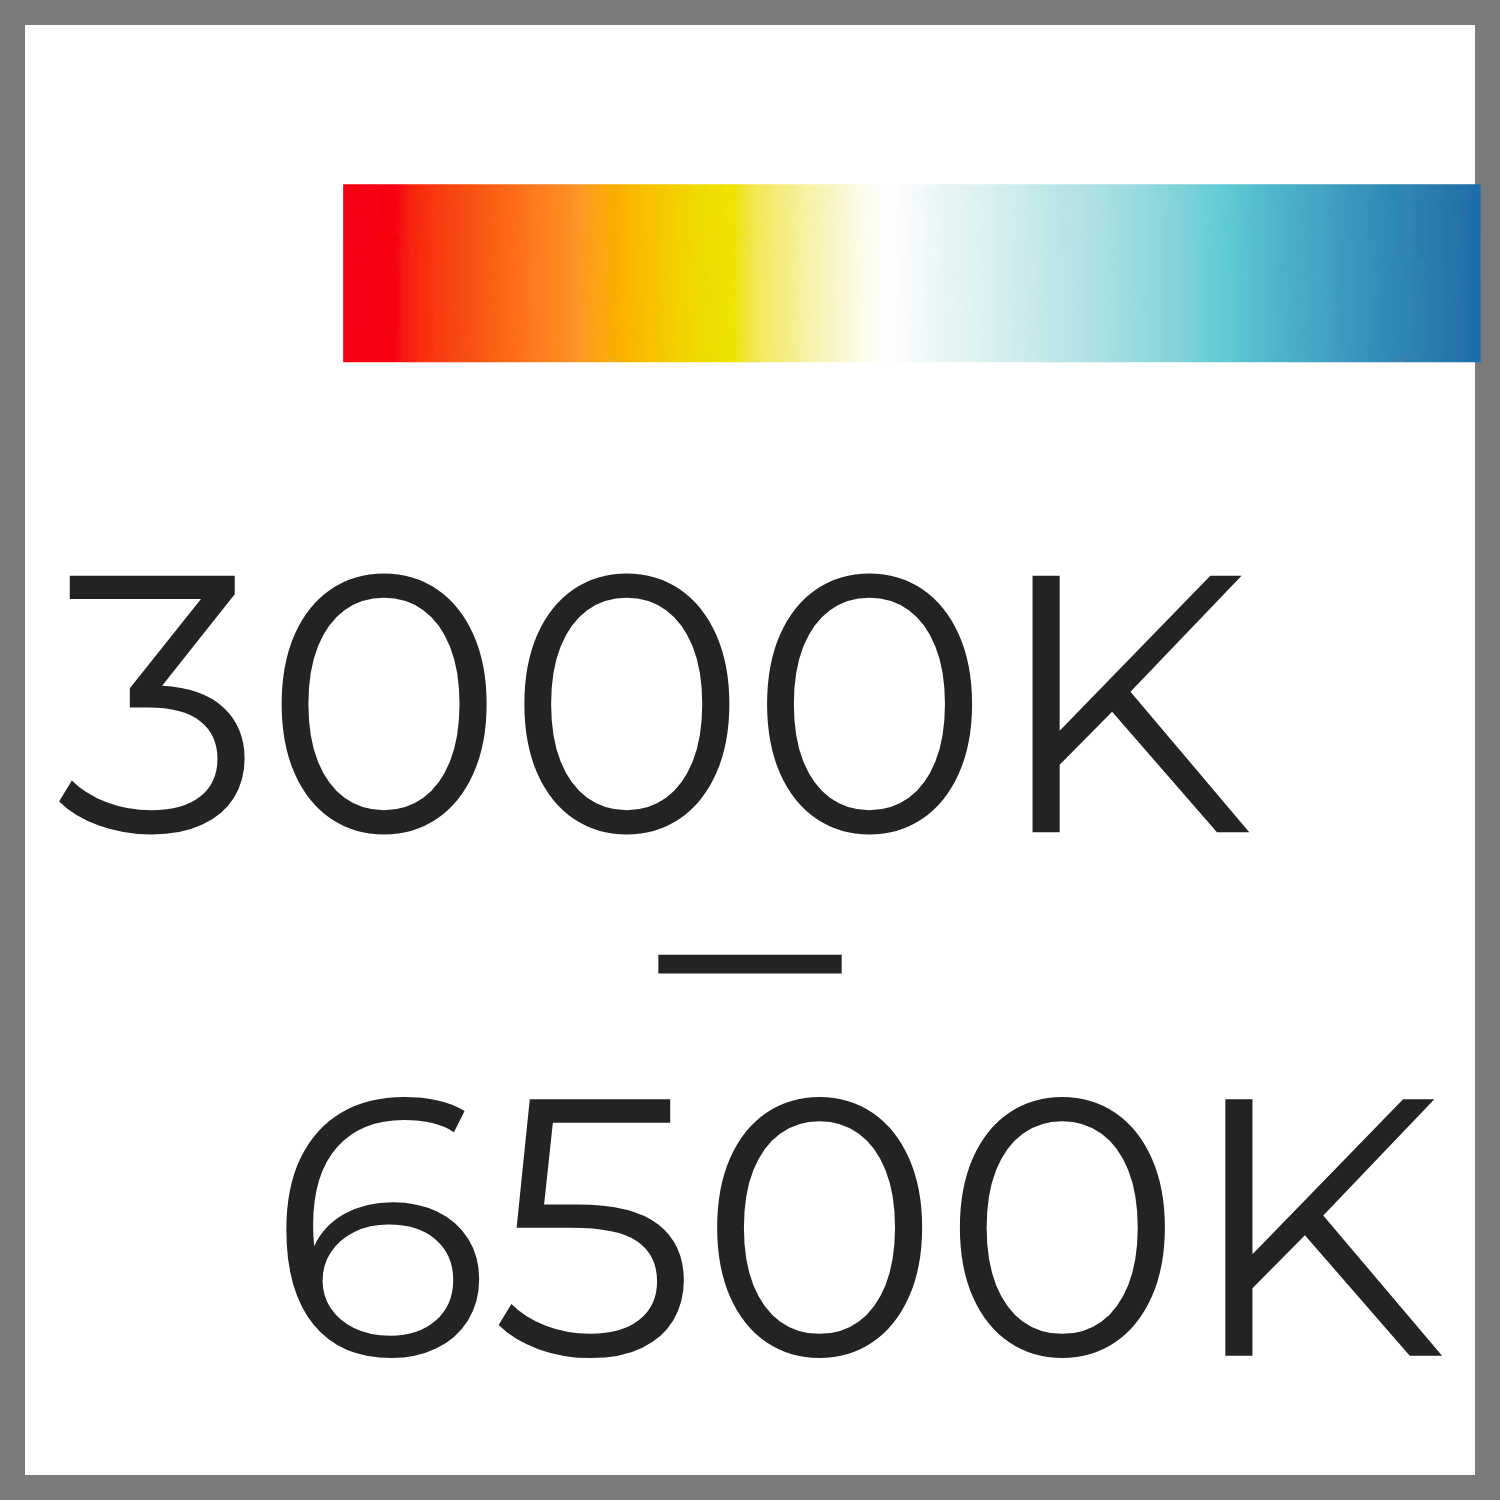 image ./media/images/fr/product/picto/picto_3000K-6500K.png